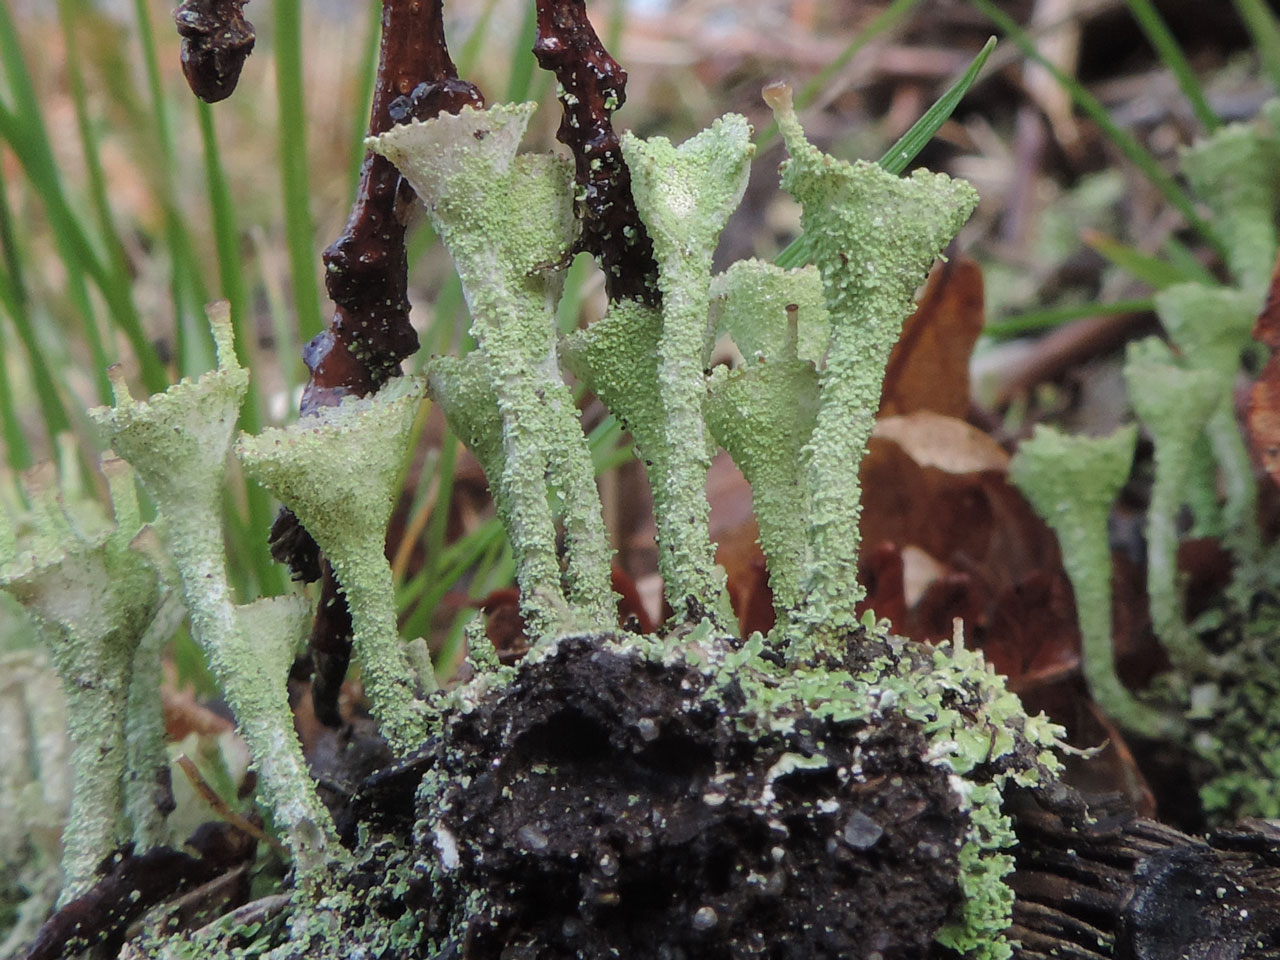 Cladonia chlorophaea s. str., New Forest